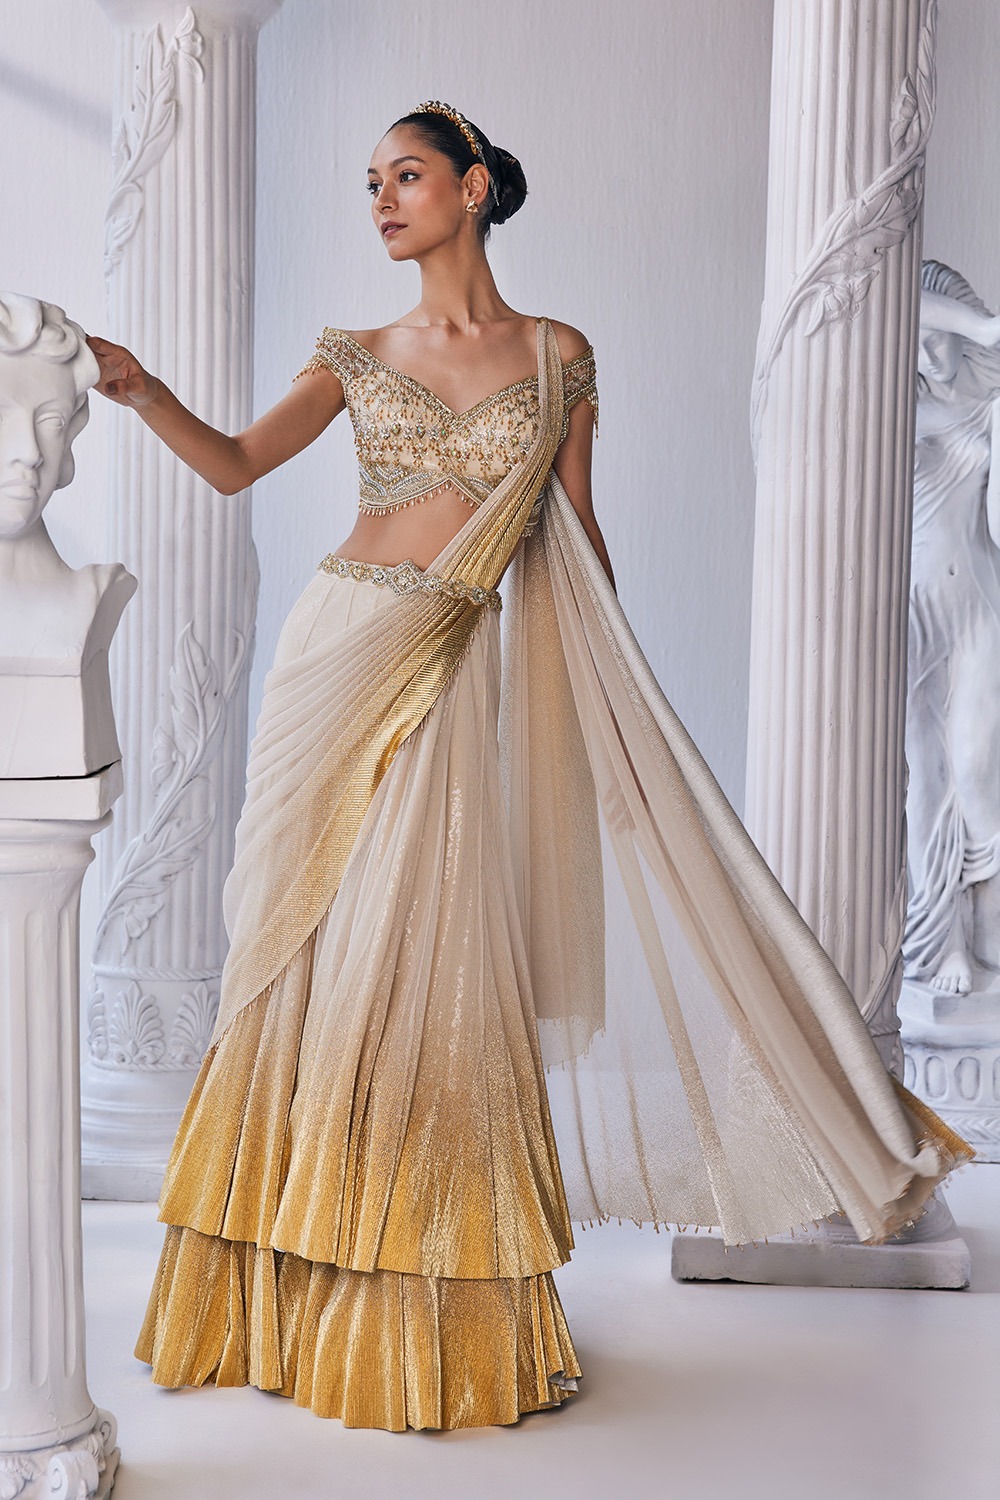 Draped Double Layer Lehenga With An Emroidered Waistband And Corset